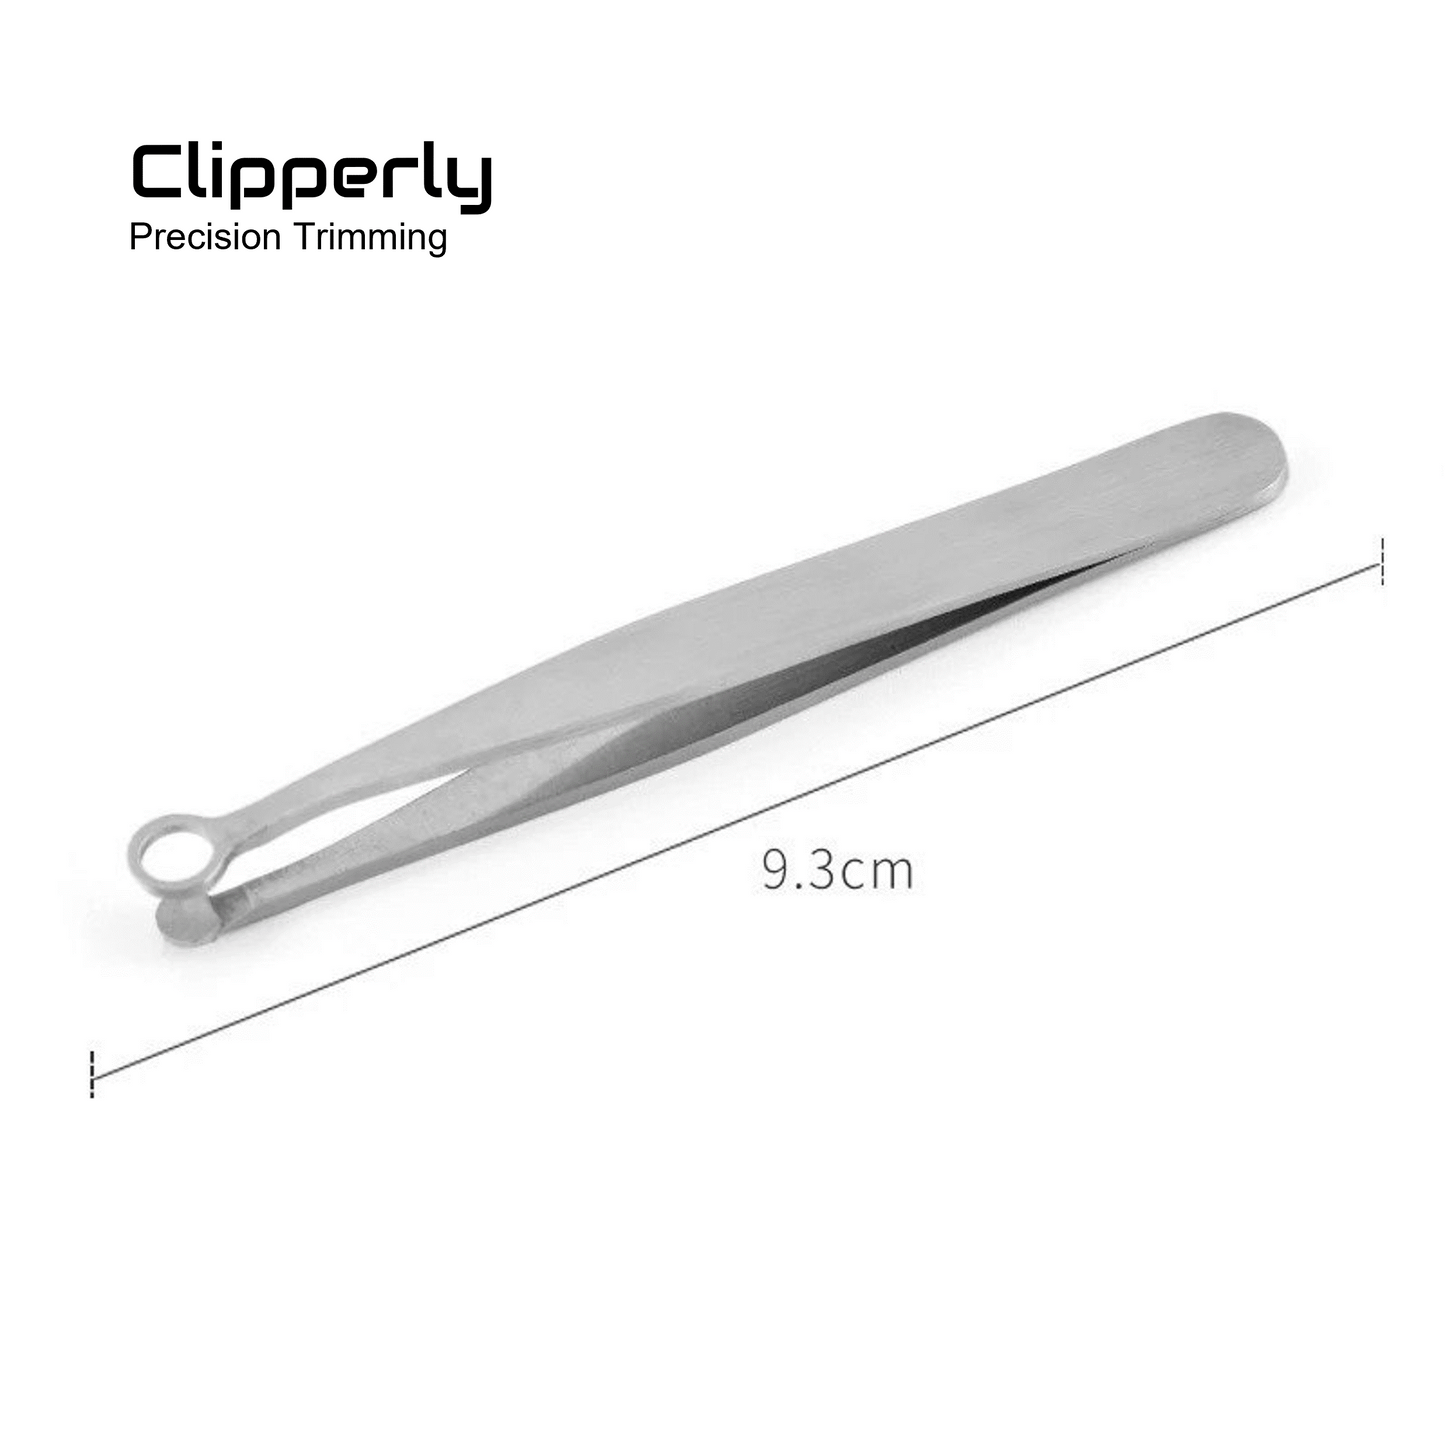 Nose and Eyebrow Hair Clippers for Precision Trimming MMi Products UK